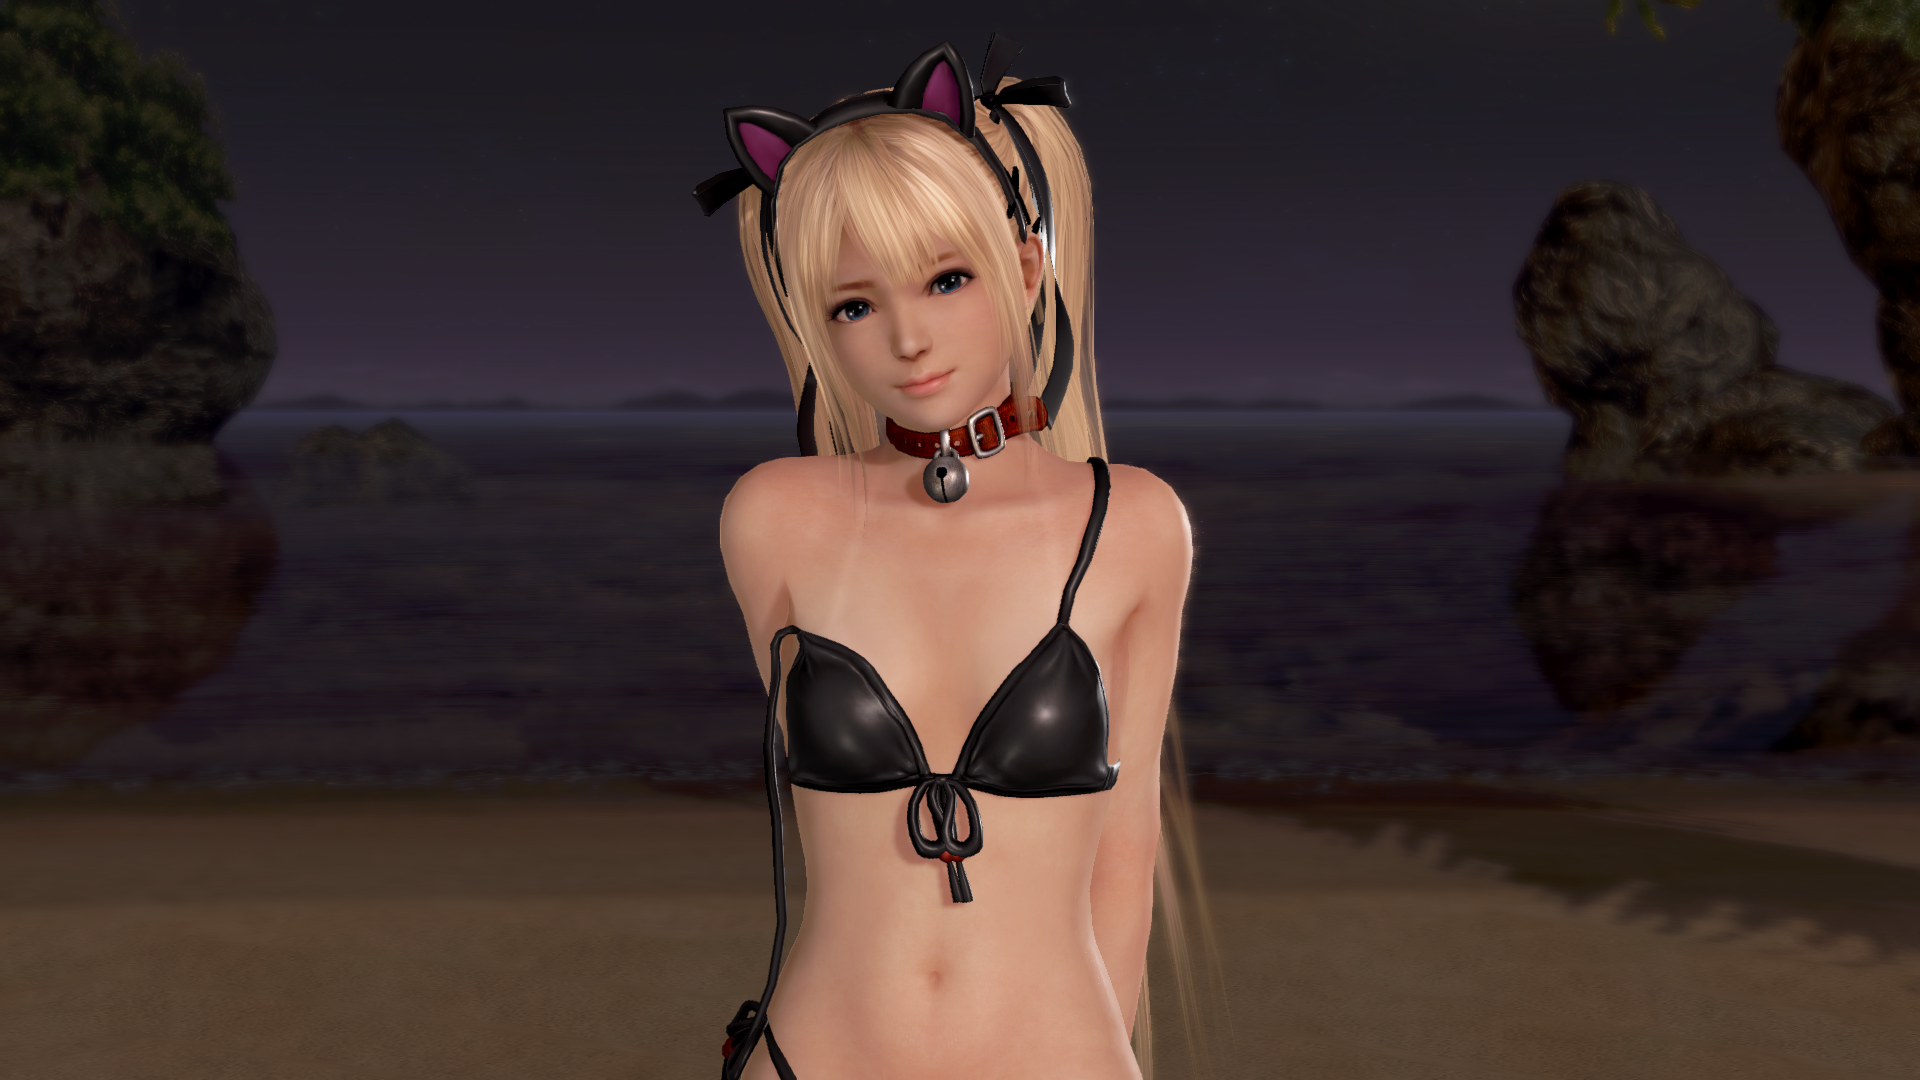 Dead Or Alive Xtreme 3